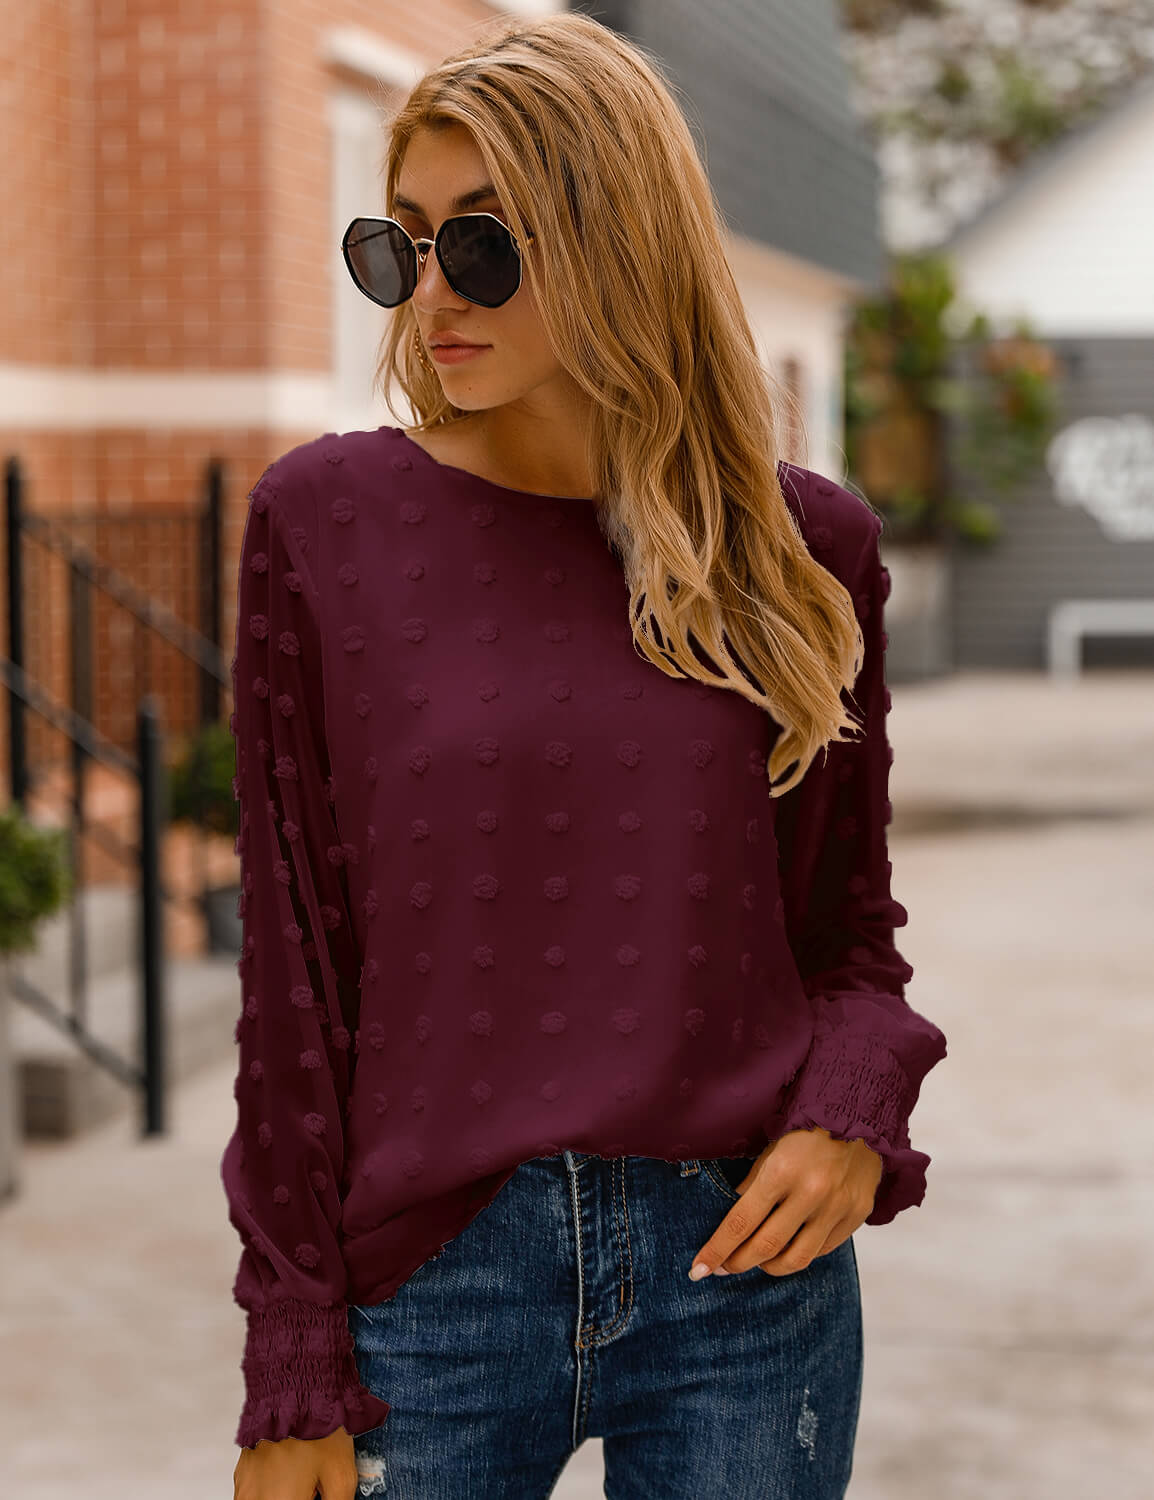 Chic Puff Sleeves Dotted Layered Blouse